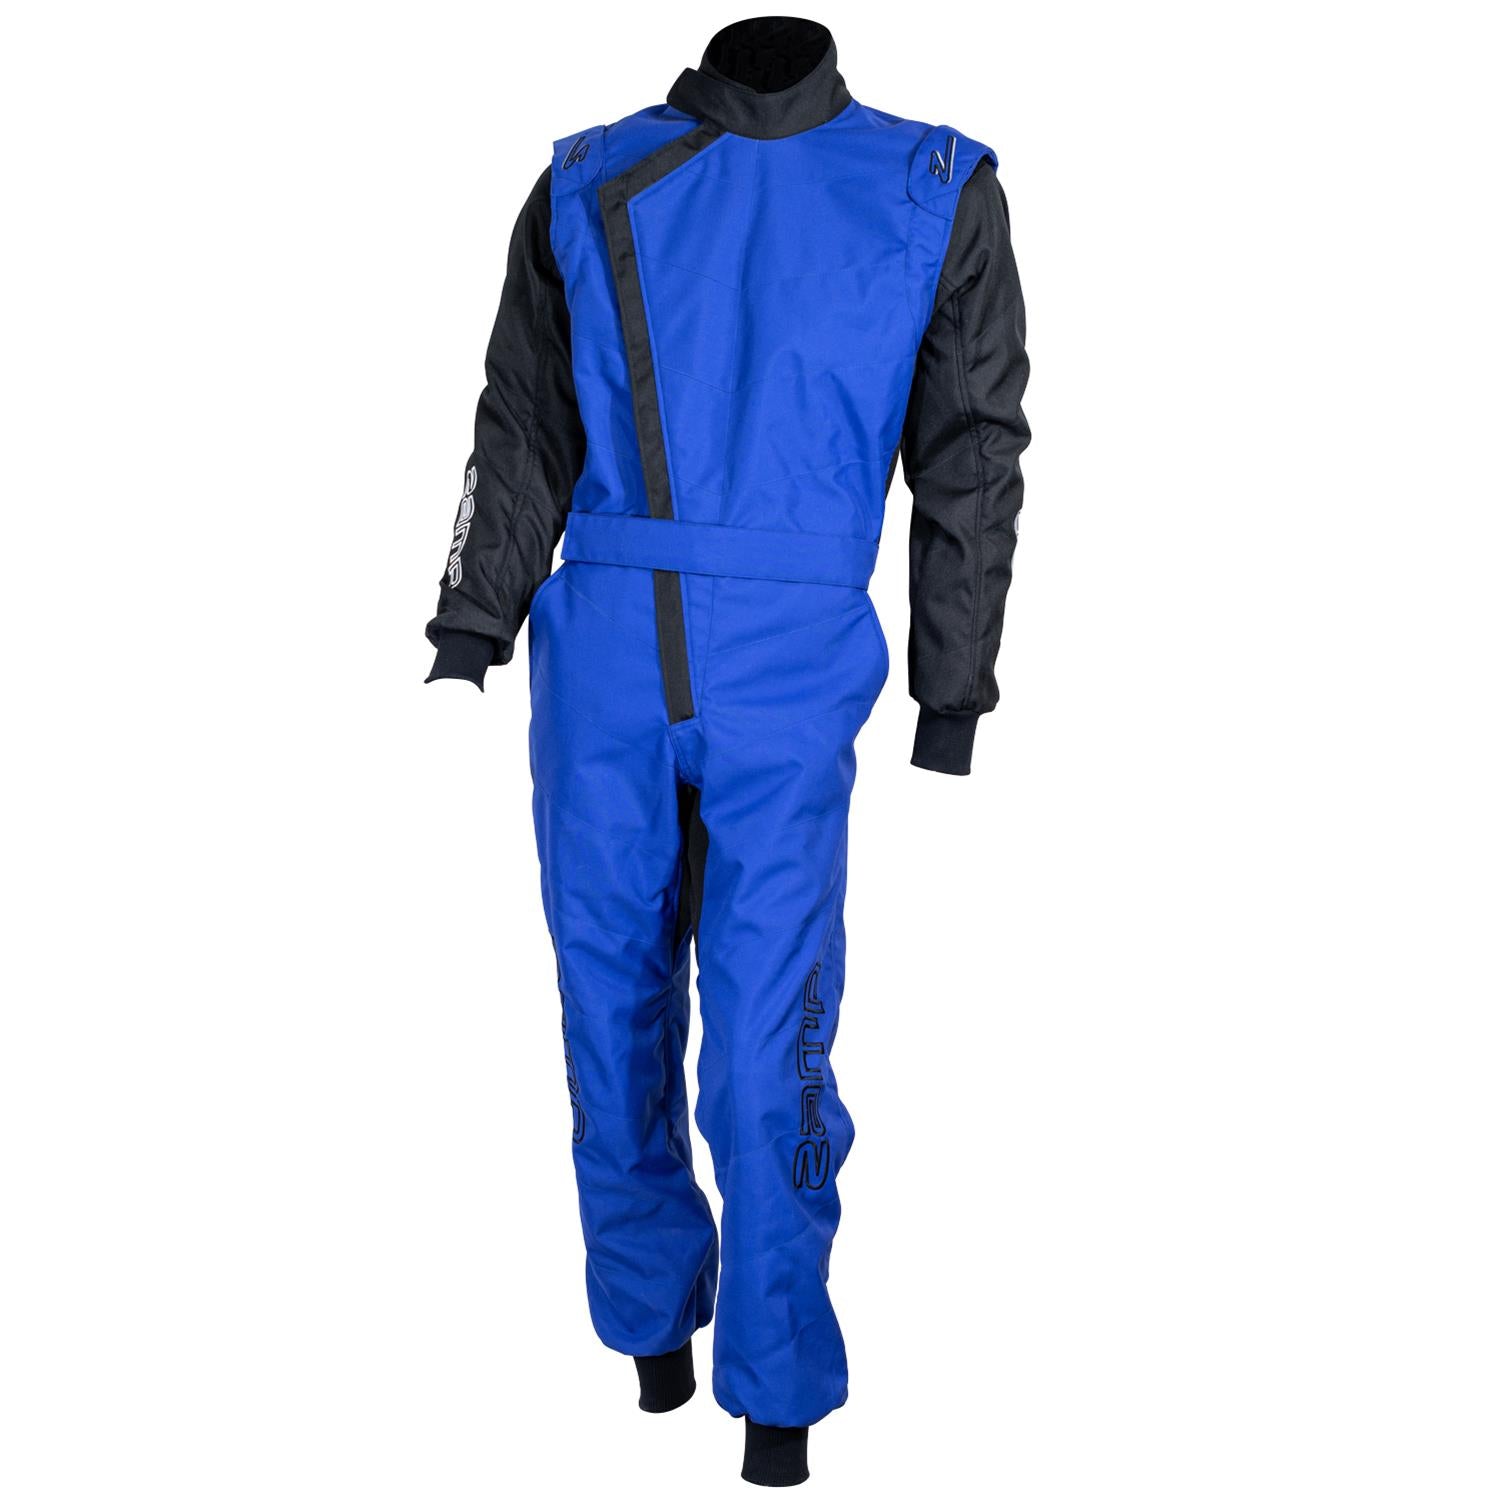 ZAMP Racing ZK-40 Youth Suit Blue R060004YM